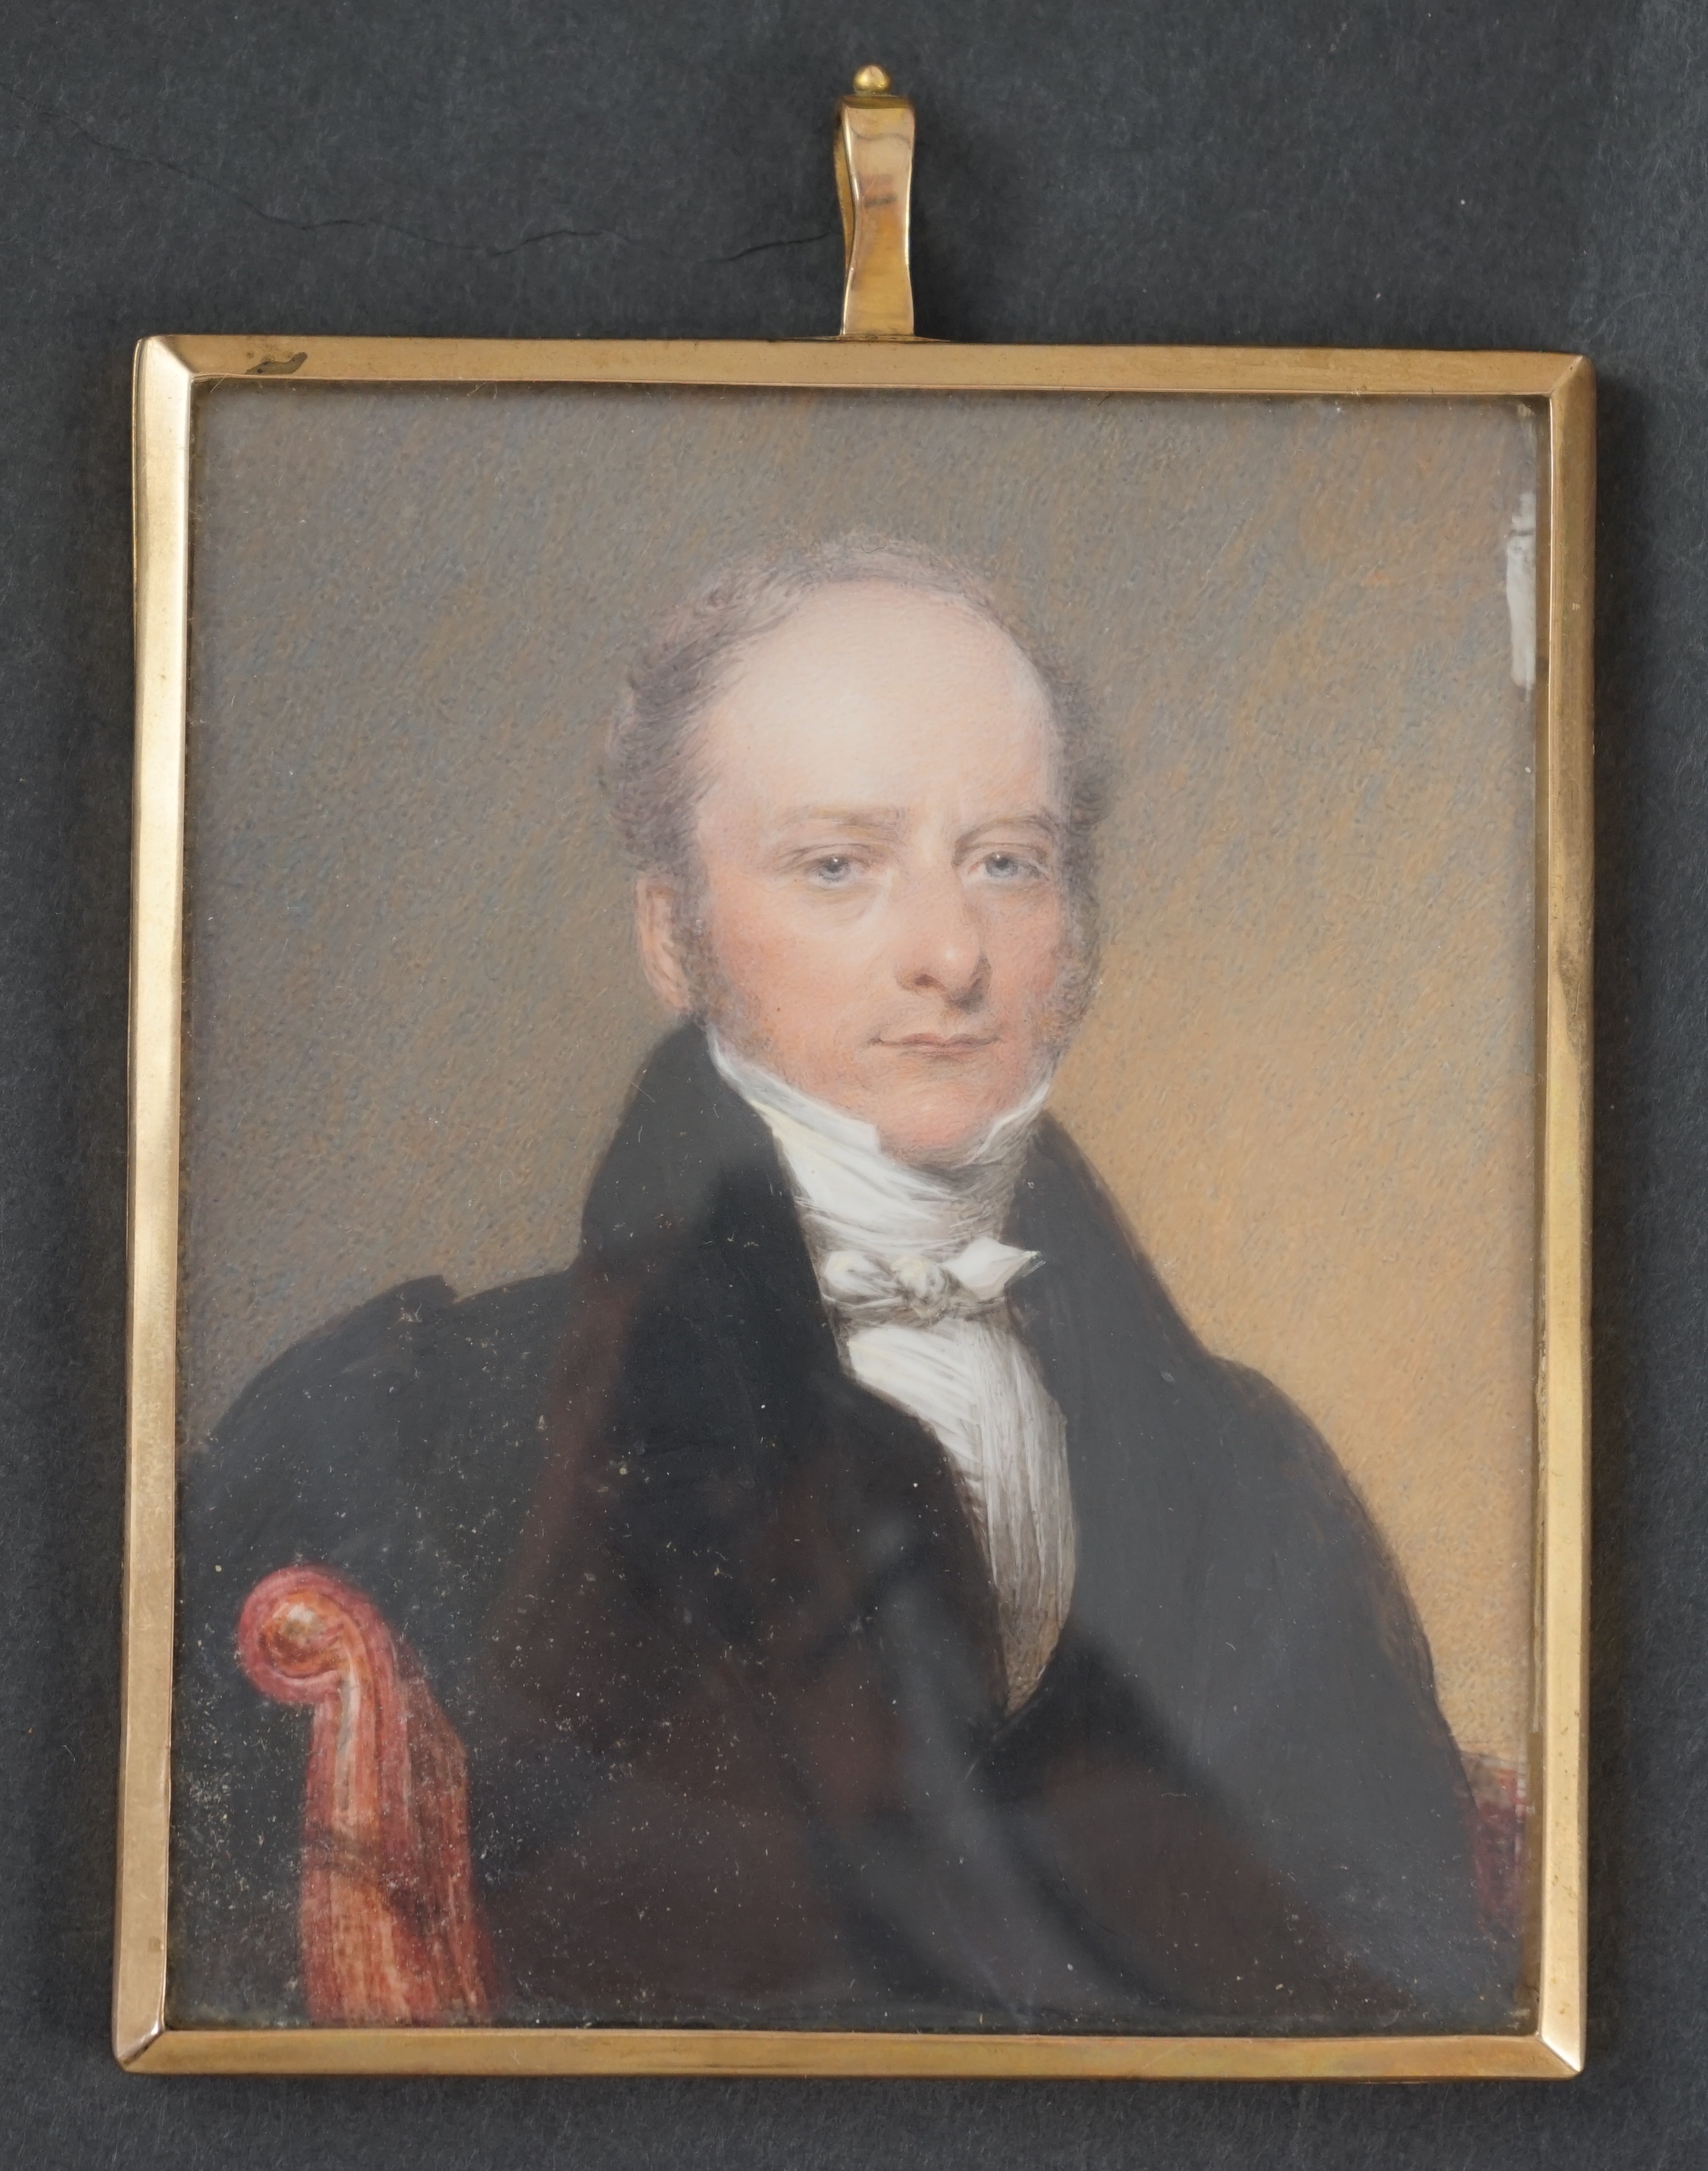 Sir William John Newton (1785-1869), Portrait miniature of a gentleman, watercolour on ivory, 9.2 x 7.7cm. CITES Submission reference 2KNJADTU